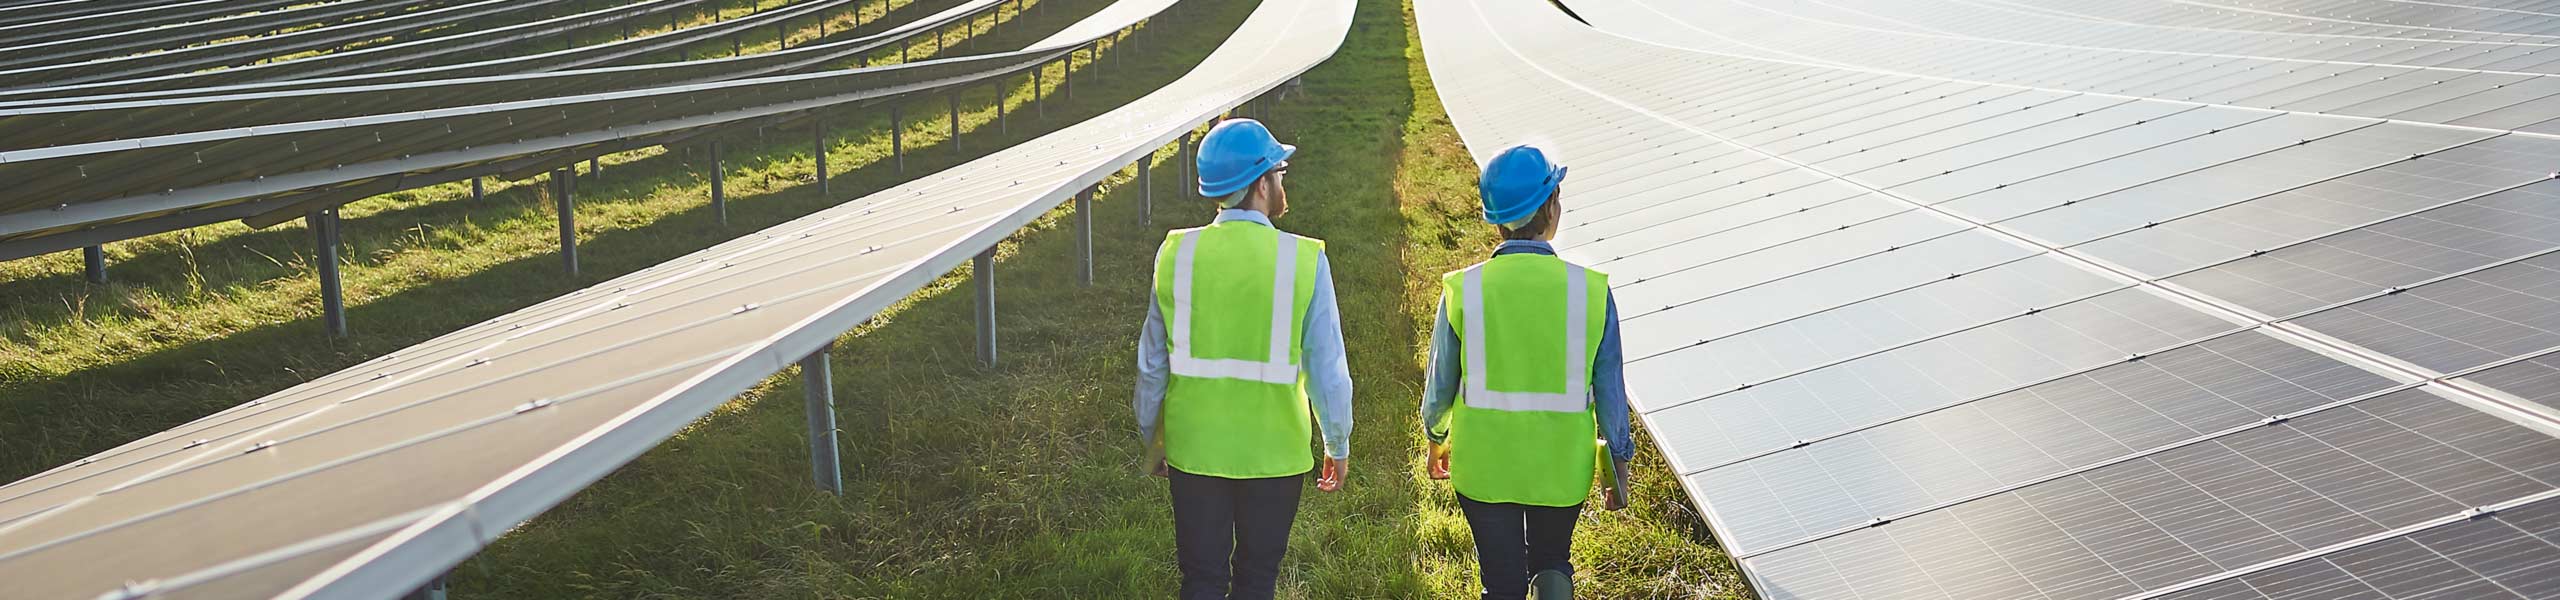 Young male and female surveying engineers in safety wear walking through solar farm.